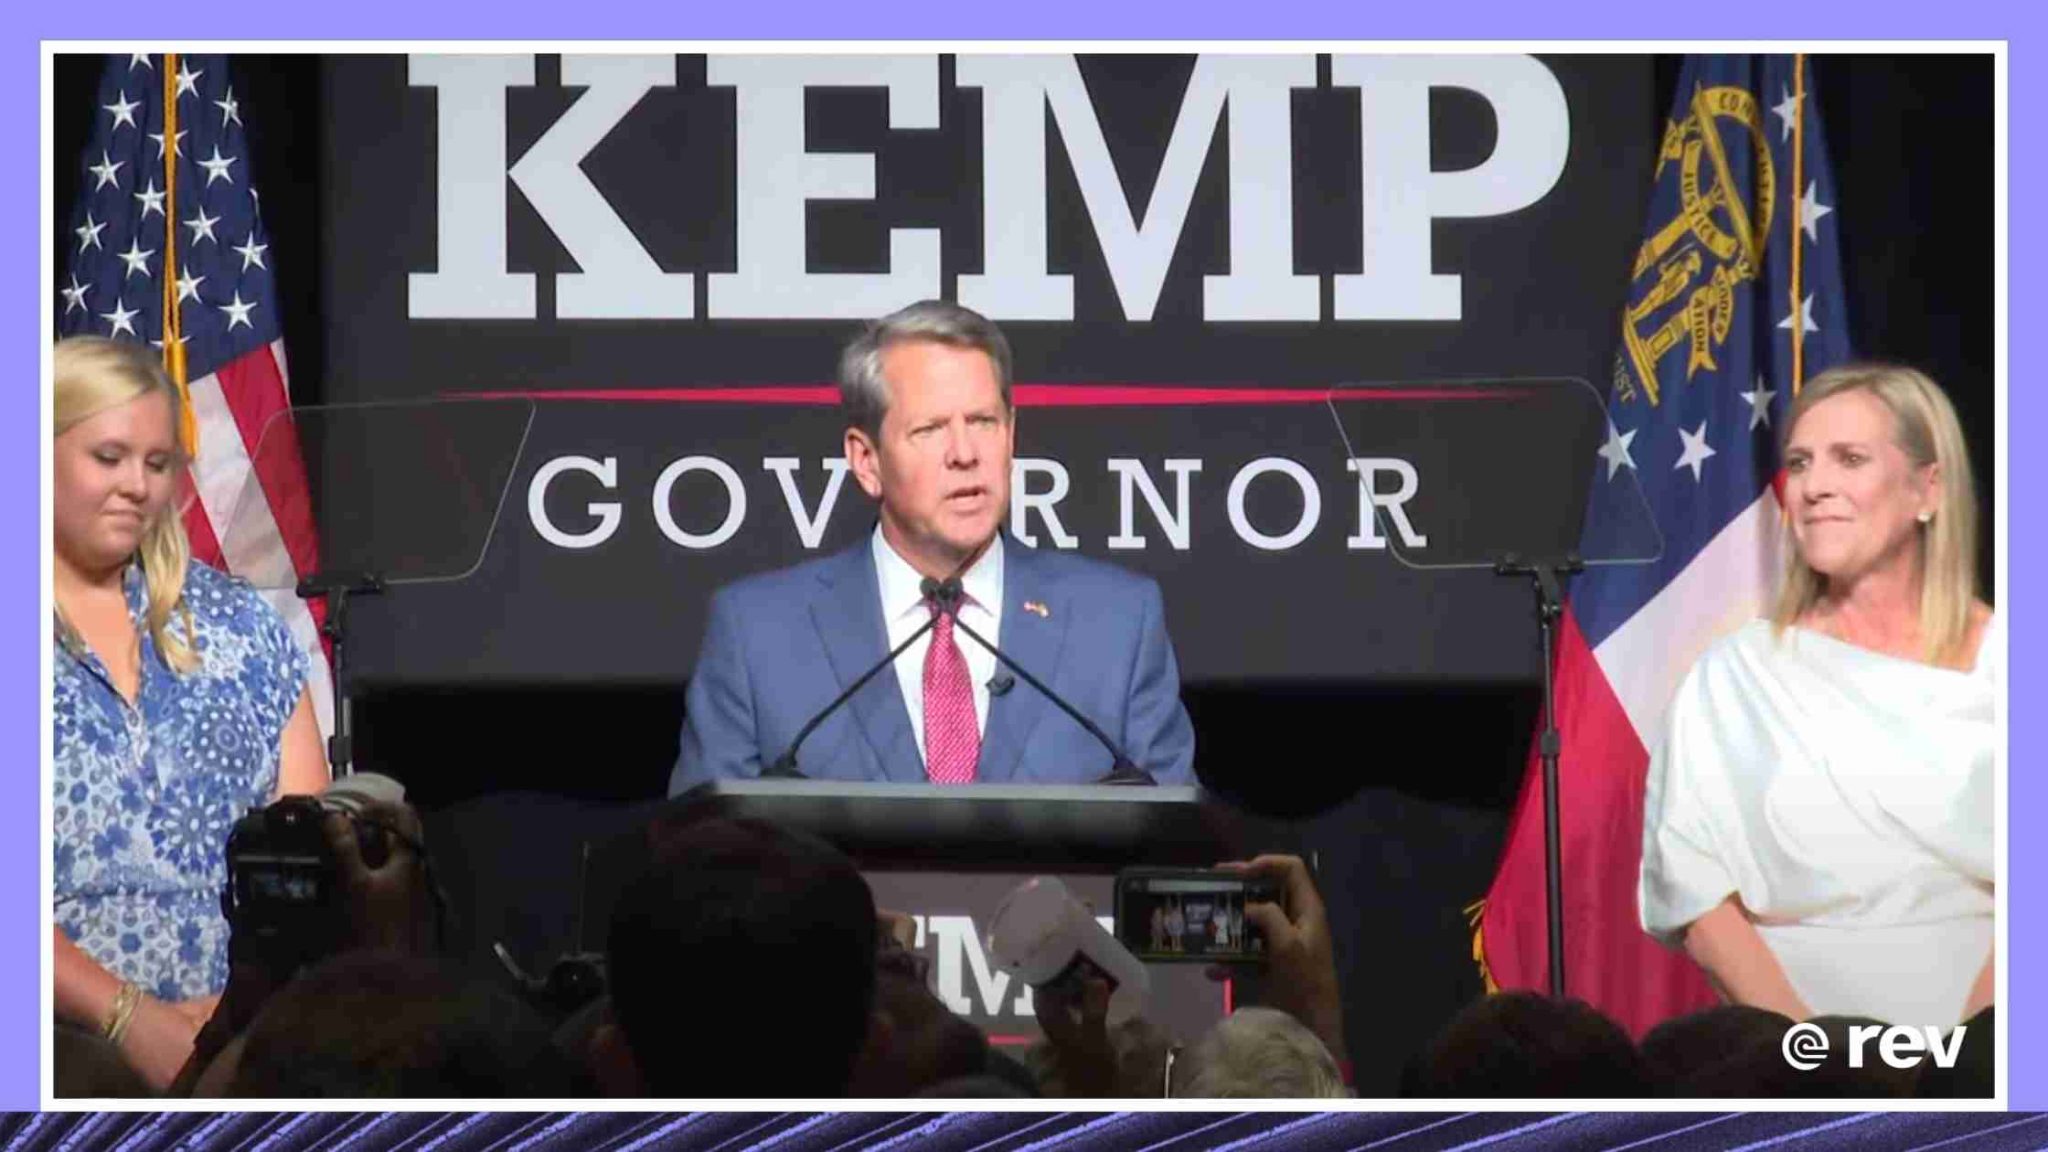 Georgia Gov. Brian Kemp delivers victory speech after securing reelection bid 5/24/22 Transcript